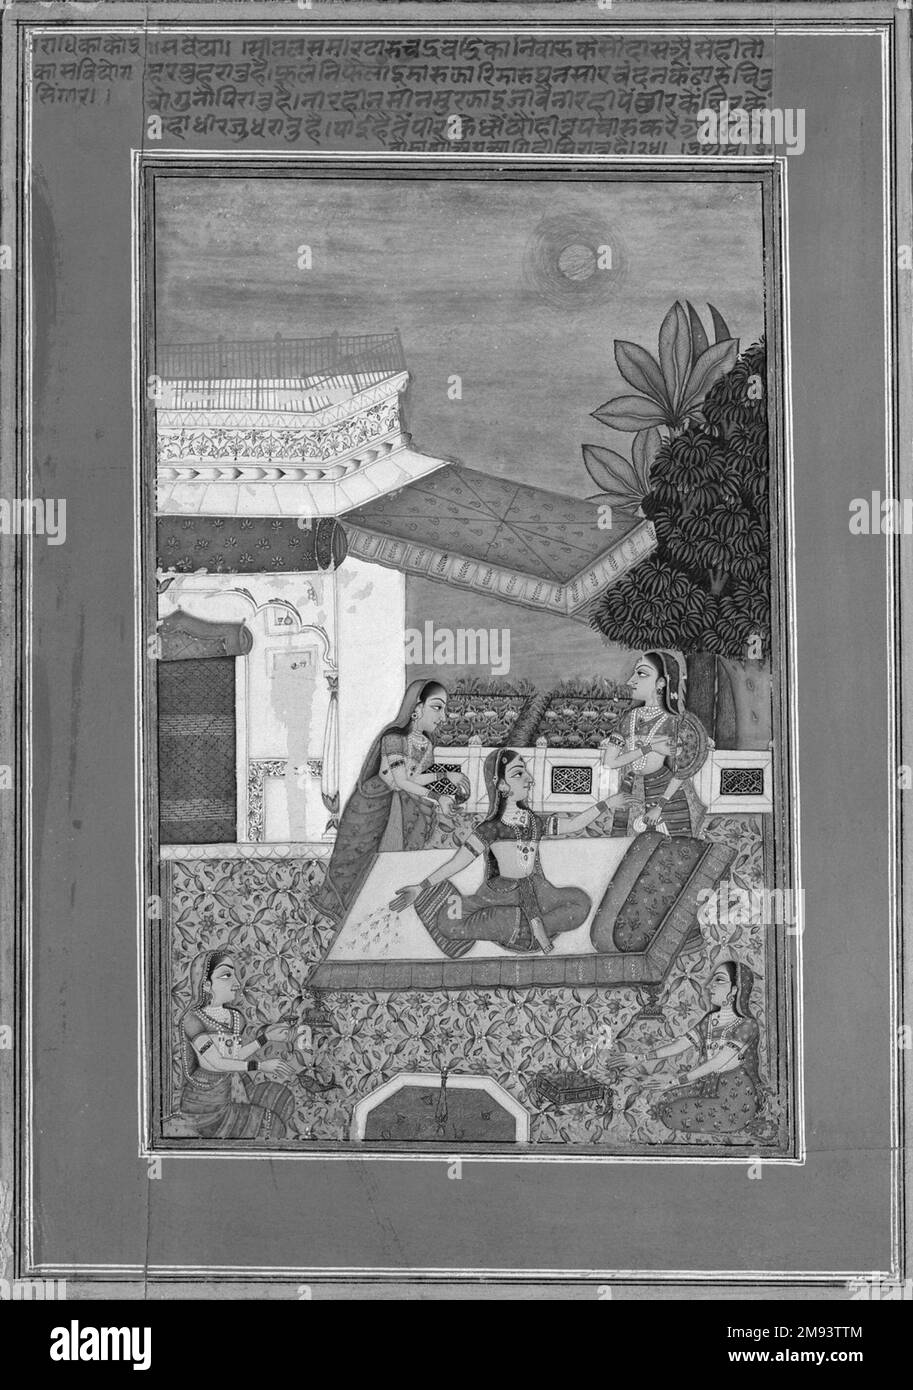 Radha manifesting the effect of love's separation from Krishna, page from a Rasikapriya series of Keshavadasa Kasam Ahmad. Radha manifesting the effect of love's separation from Krishna, page from a Rasikapriya series of Keshavadasa, 1749. Opaque watercolor, gold, and silver on paper, sheet: 10 1/4 x 7 5/16 in. (26.0 x 18.6 cm).   Asian Art 1749 Stock Photo